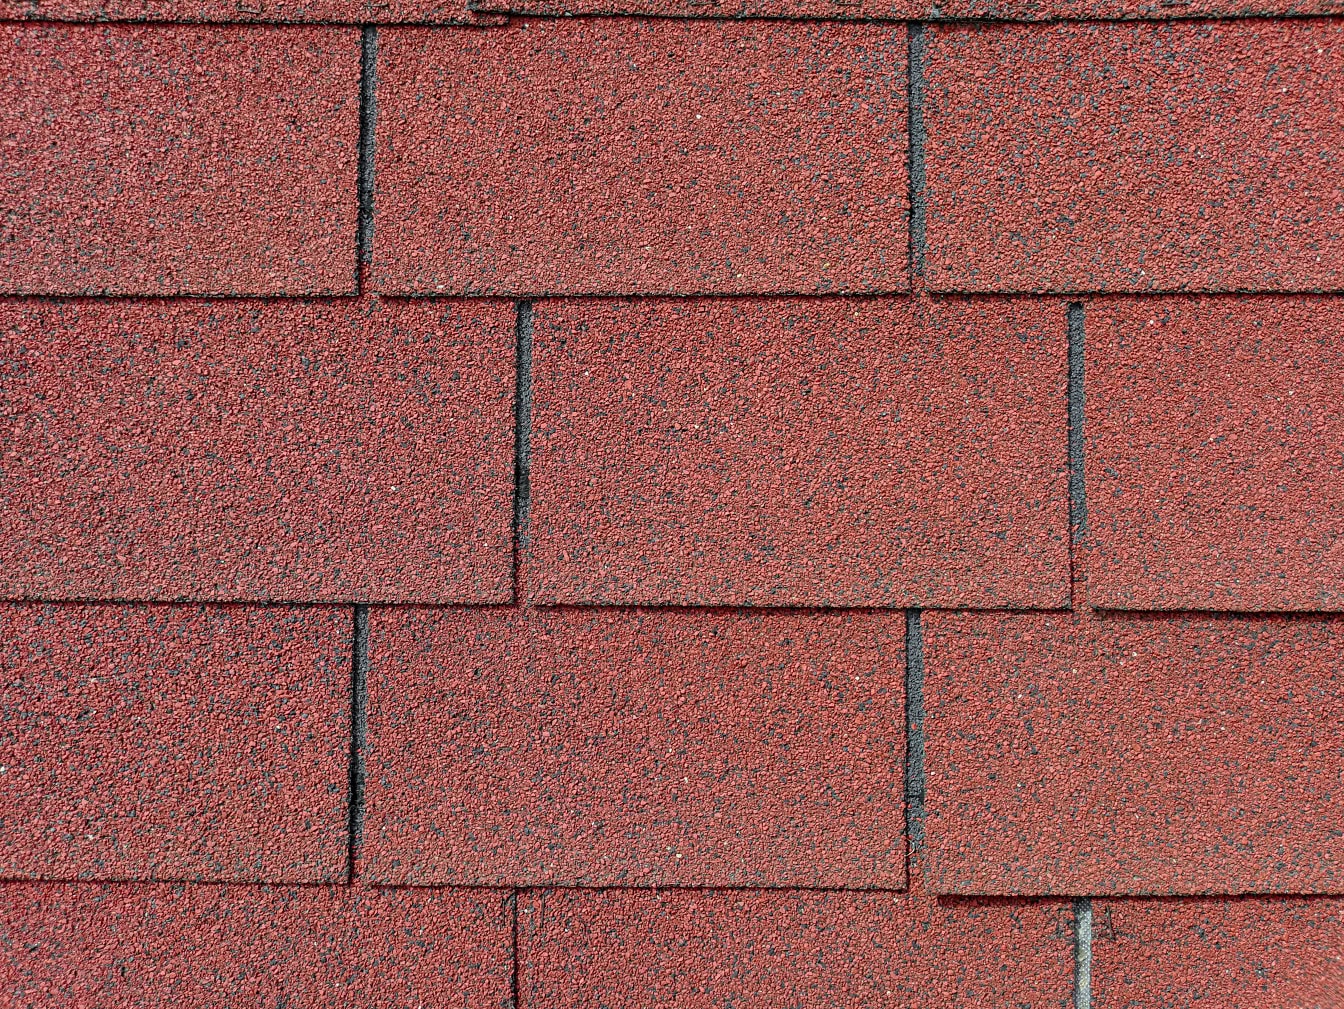 Texture of a dark reddish-brown shingle roof of rectangular shape made of mix of bitumen, rubber and recycled plastic